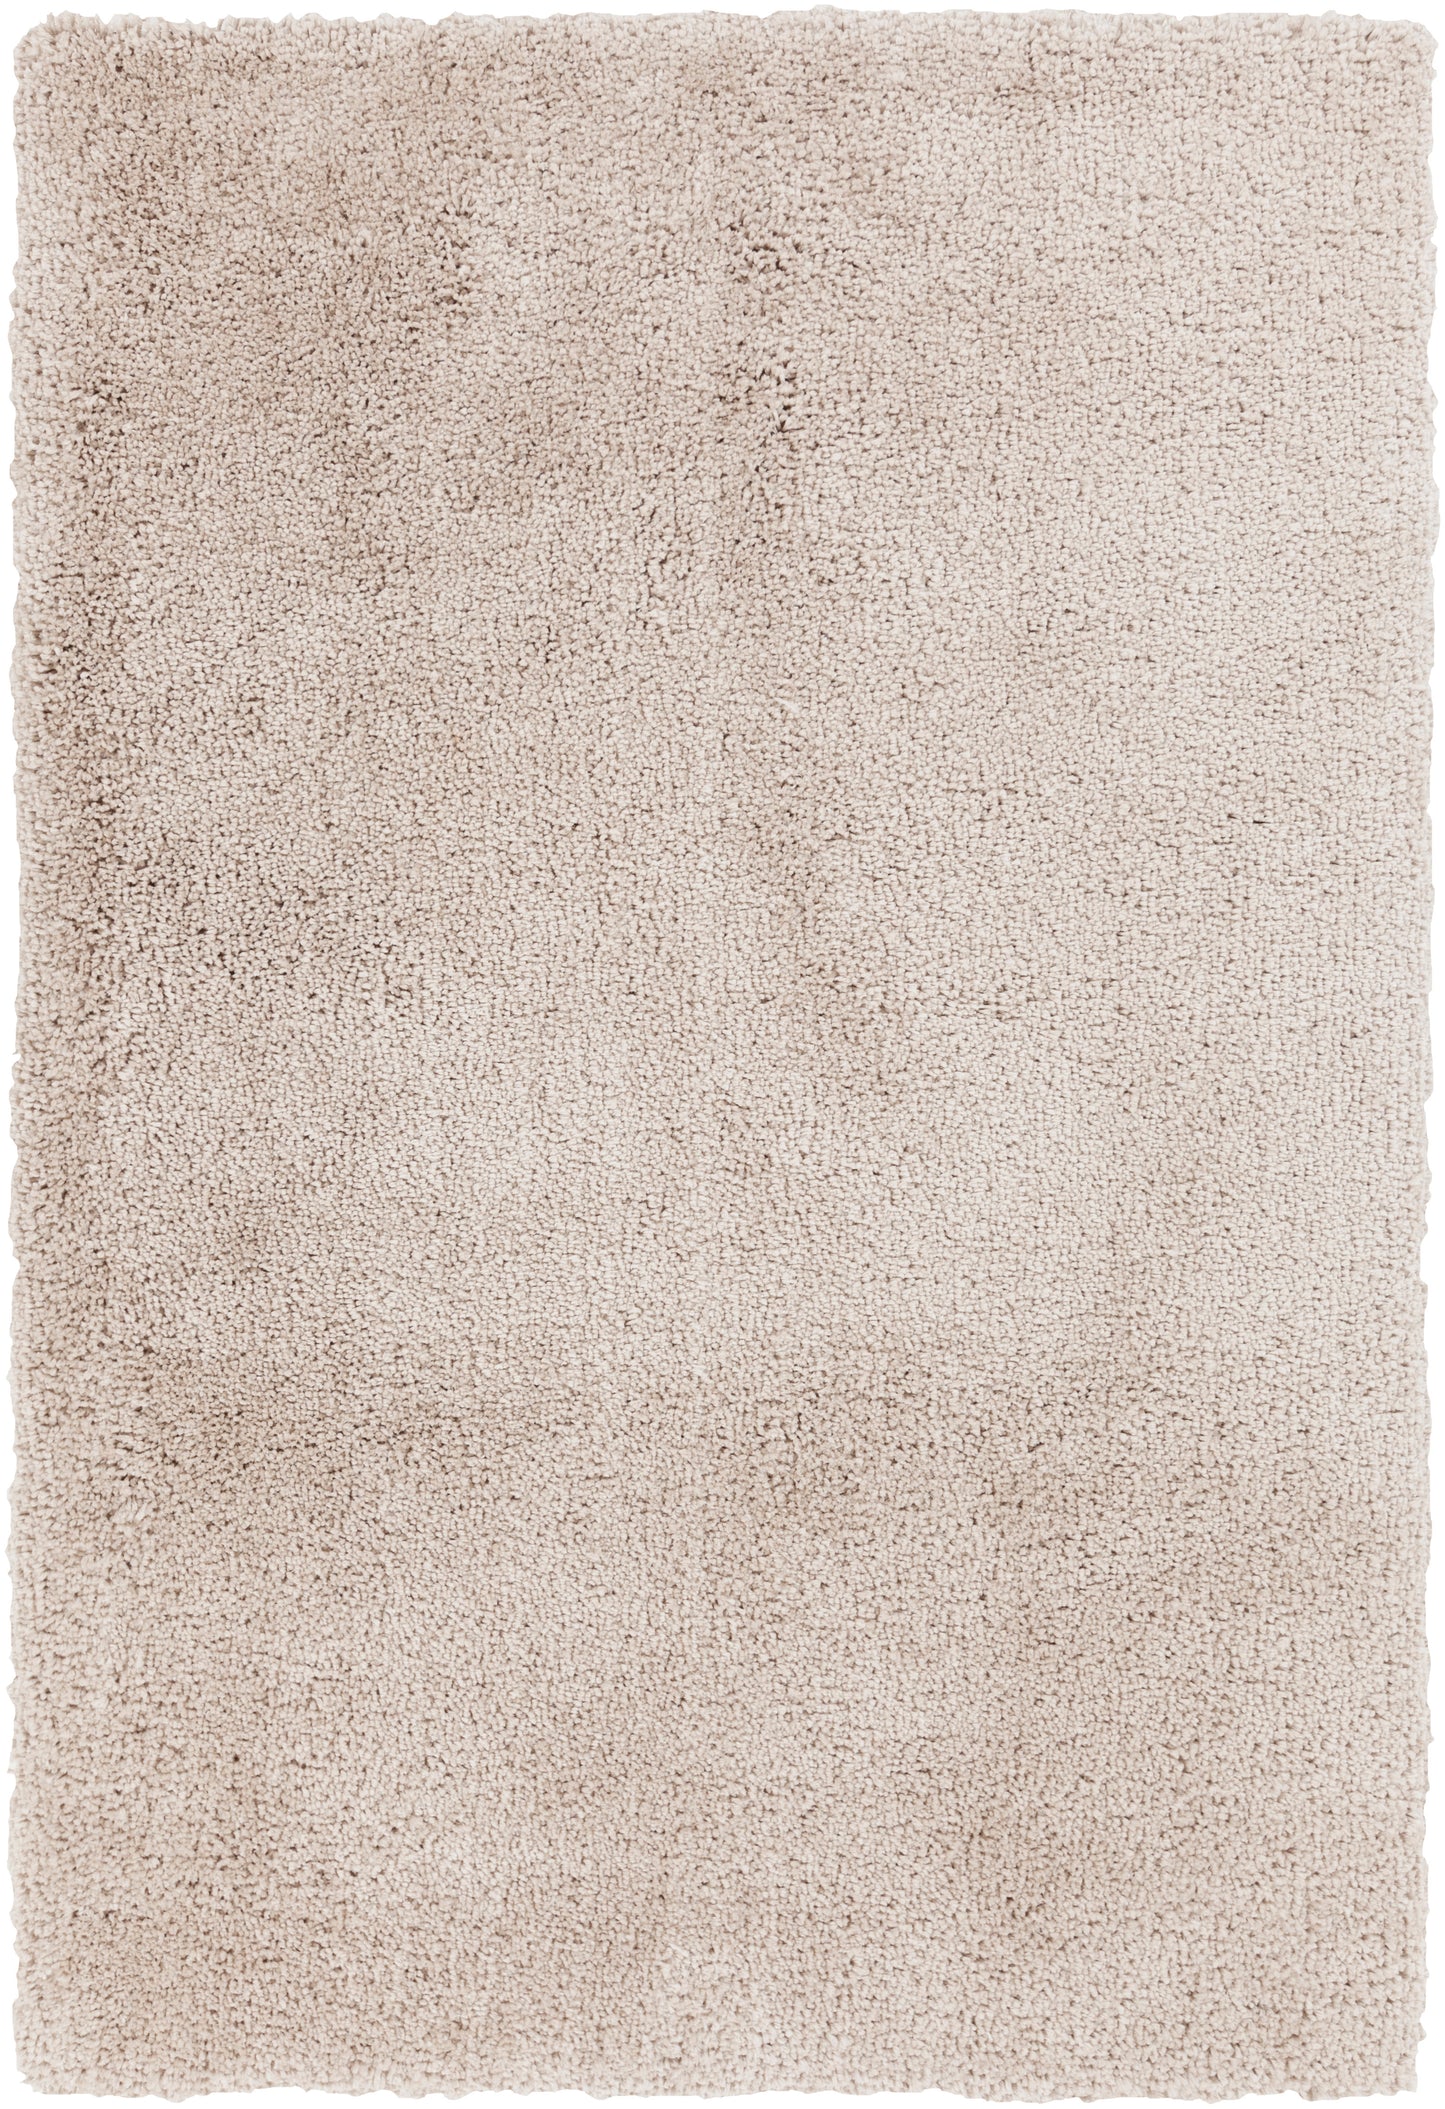 Goddess 628 Hand Woven Synthetic Blend Indoor Area Rug by Surya Rugs